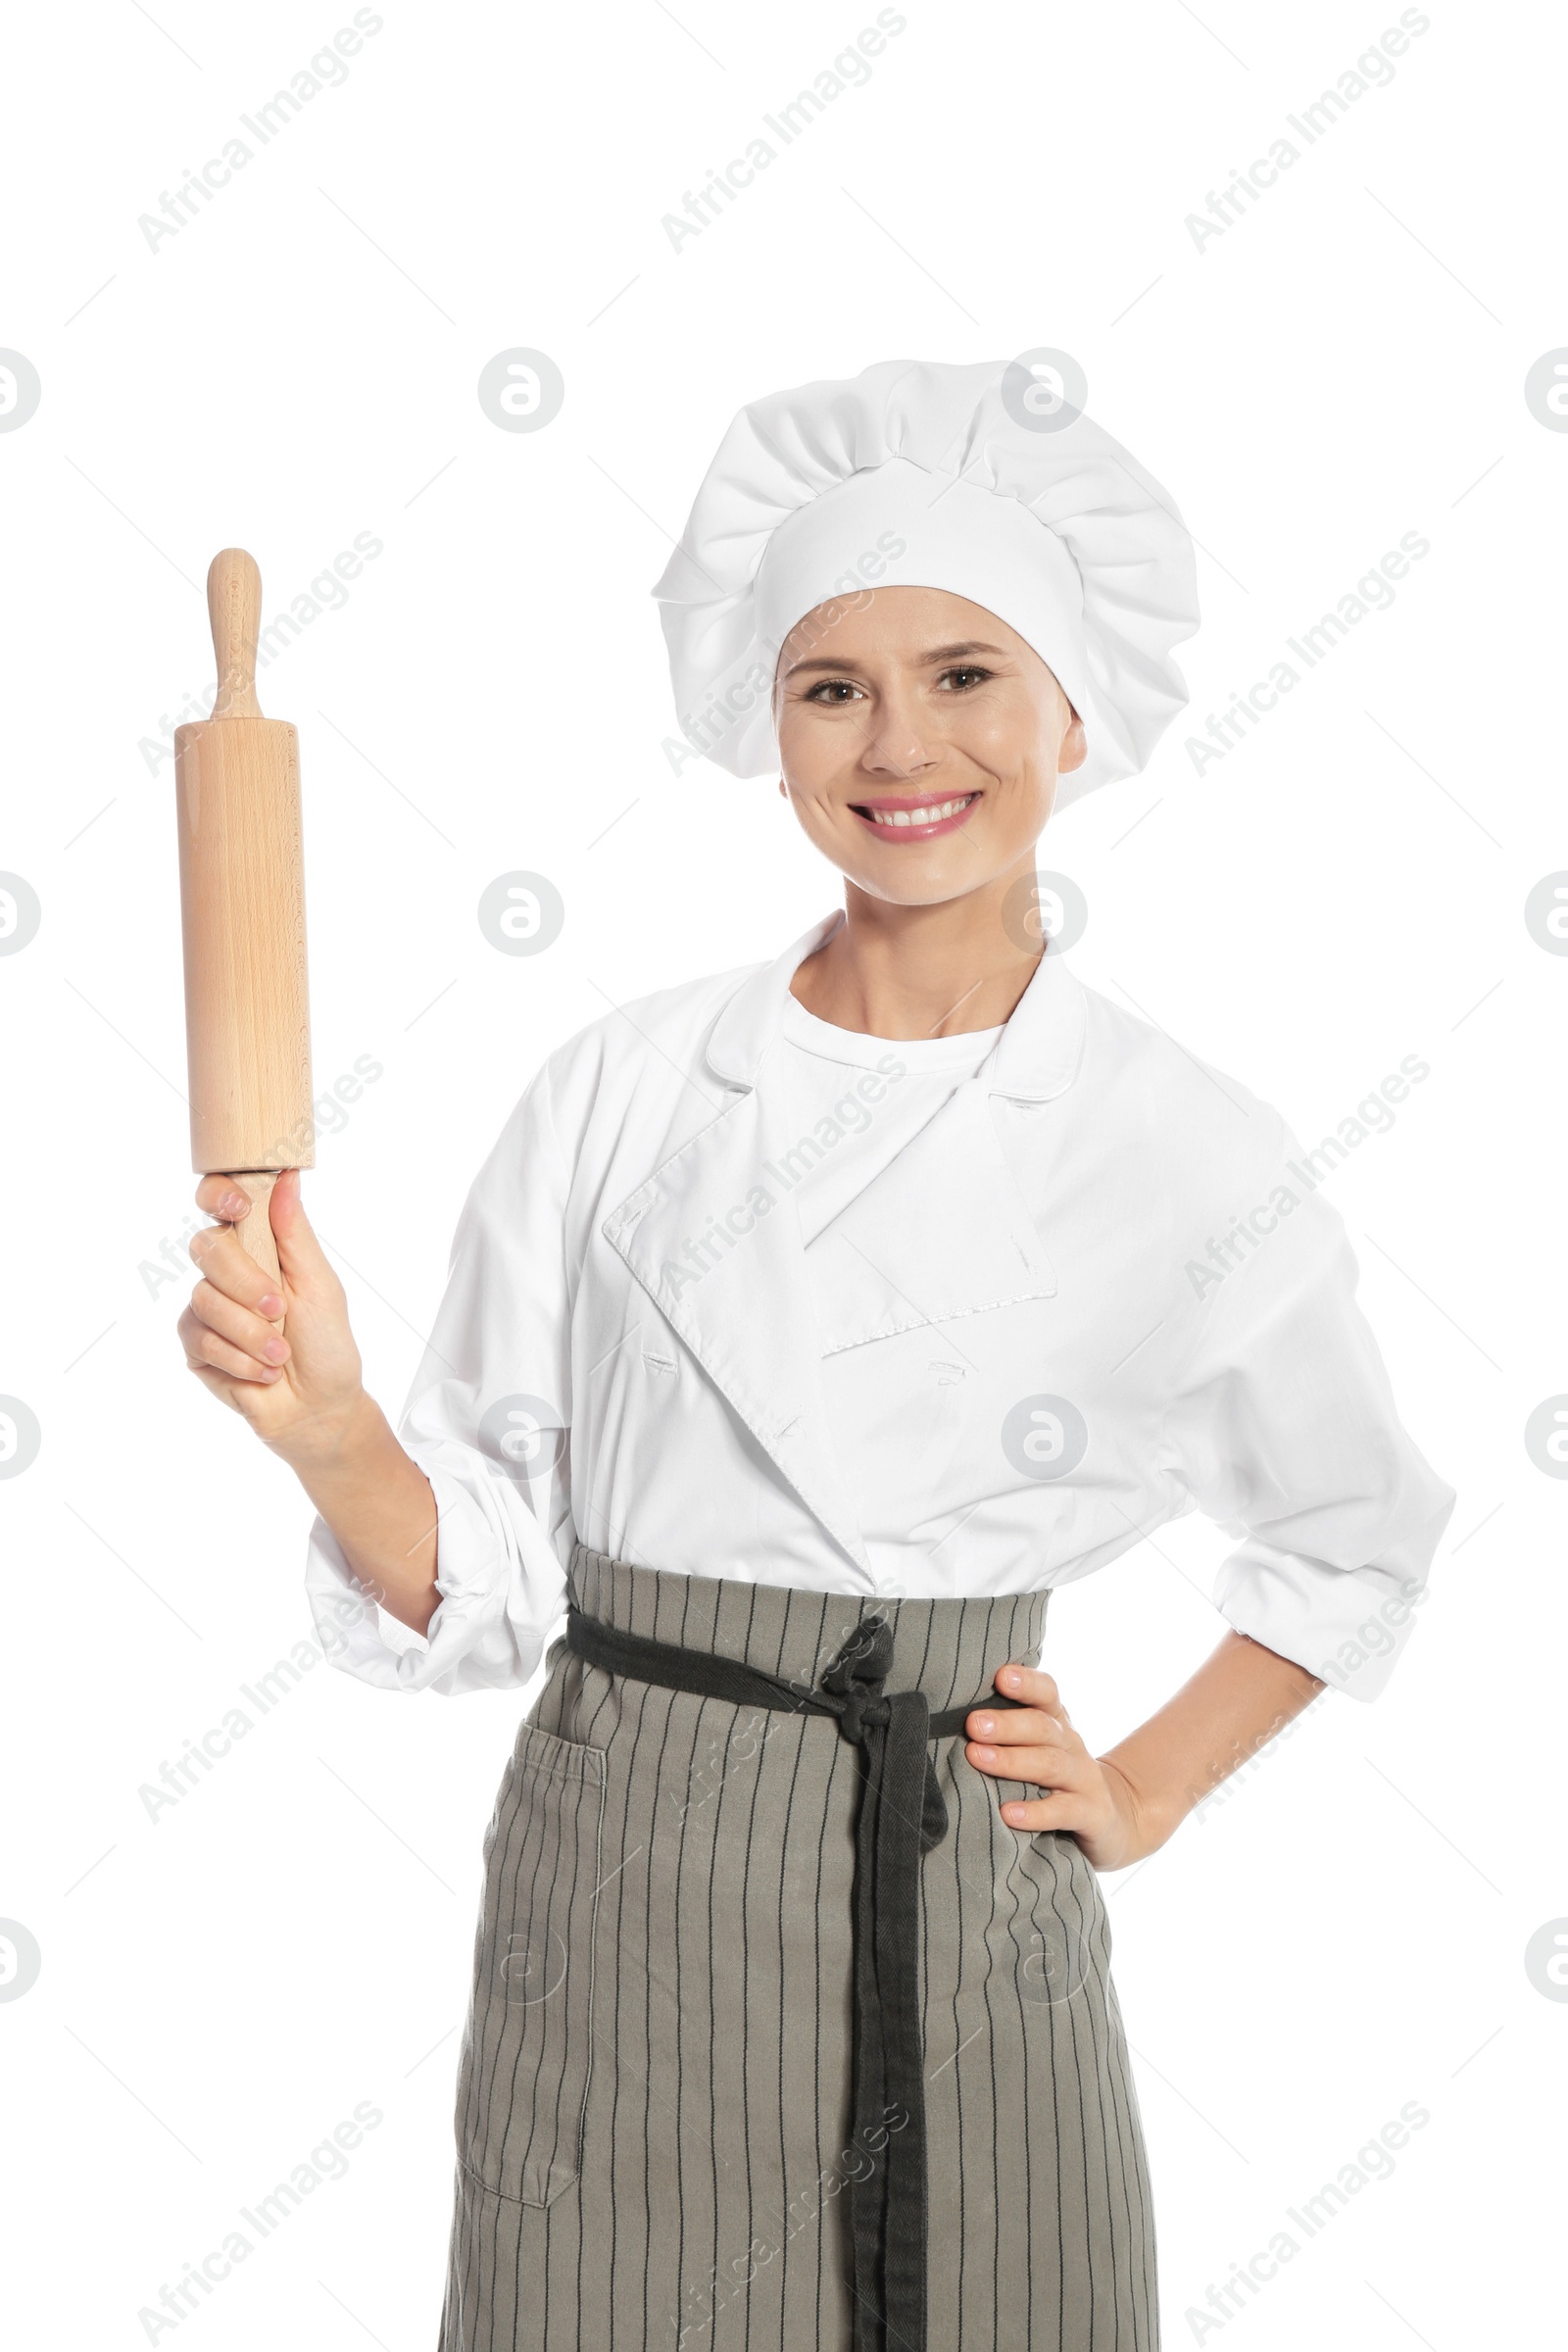 Photo of Female chef holding rolling pin on white background